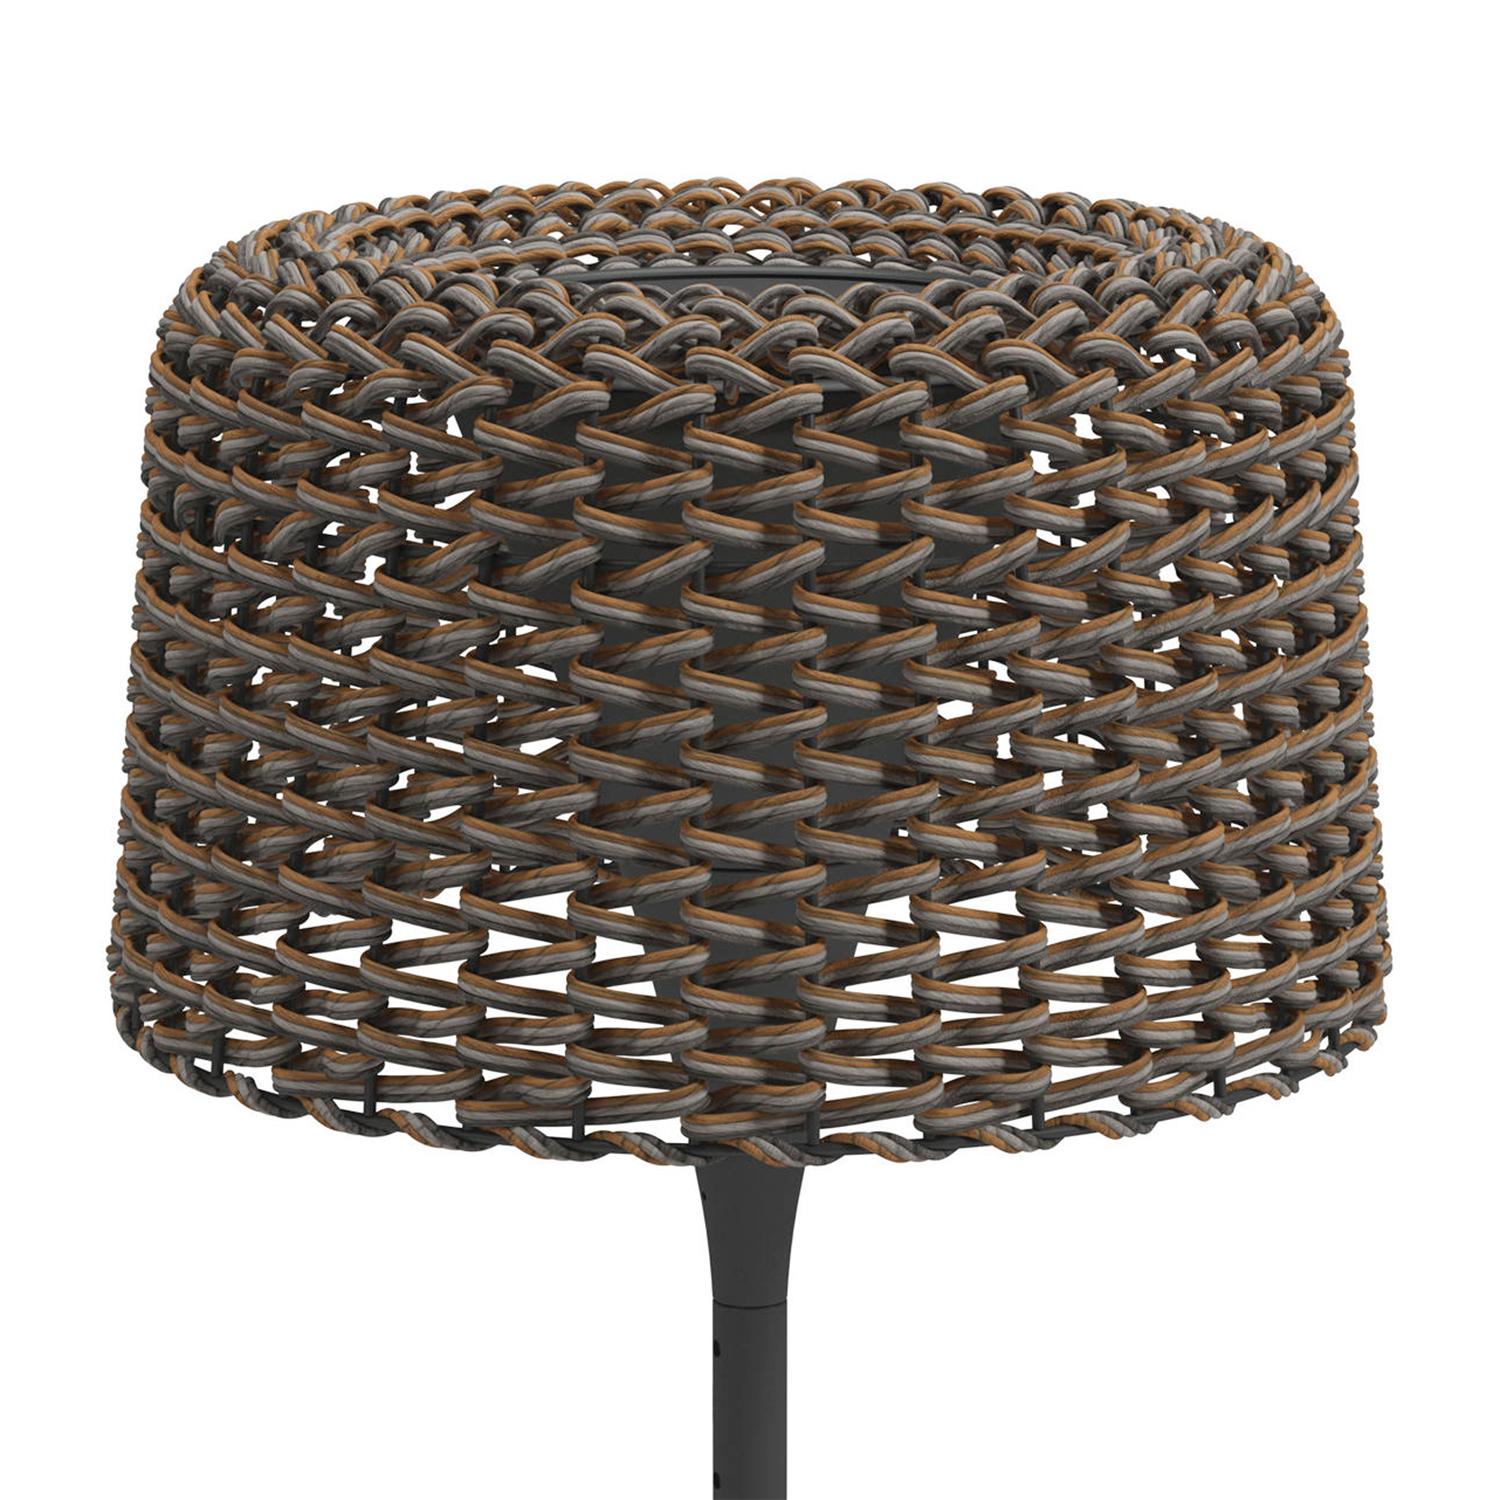 Table Lamp Wicker Outdoor Black with wicker outdoor woven
lampshade in brown finish, with aluminium anthracite powder-coated
structure and teak trim on base edge. With solar and mains power 
rechargable LED light unit. Adaptor Output 4.2V. 65ft